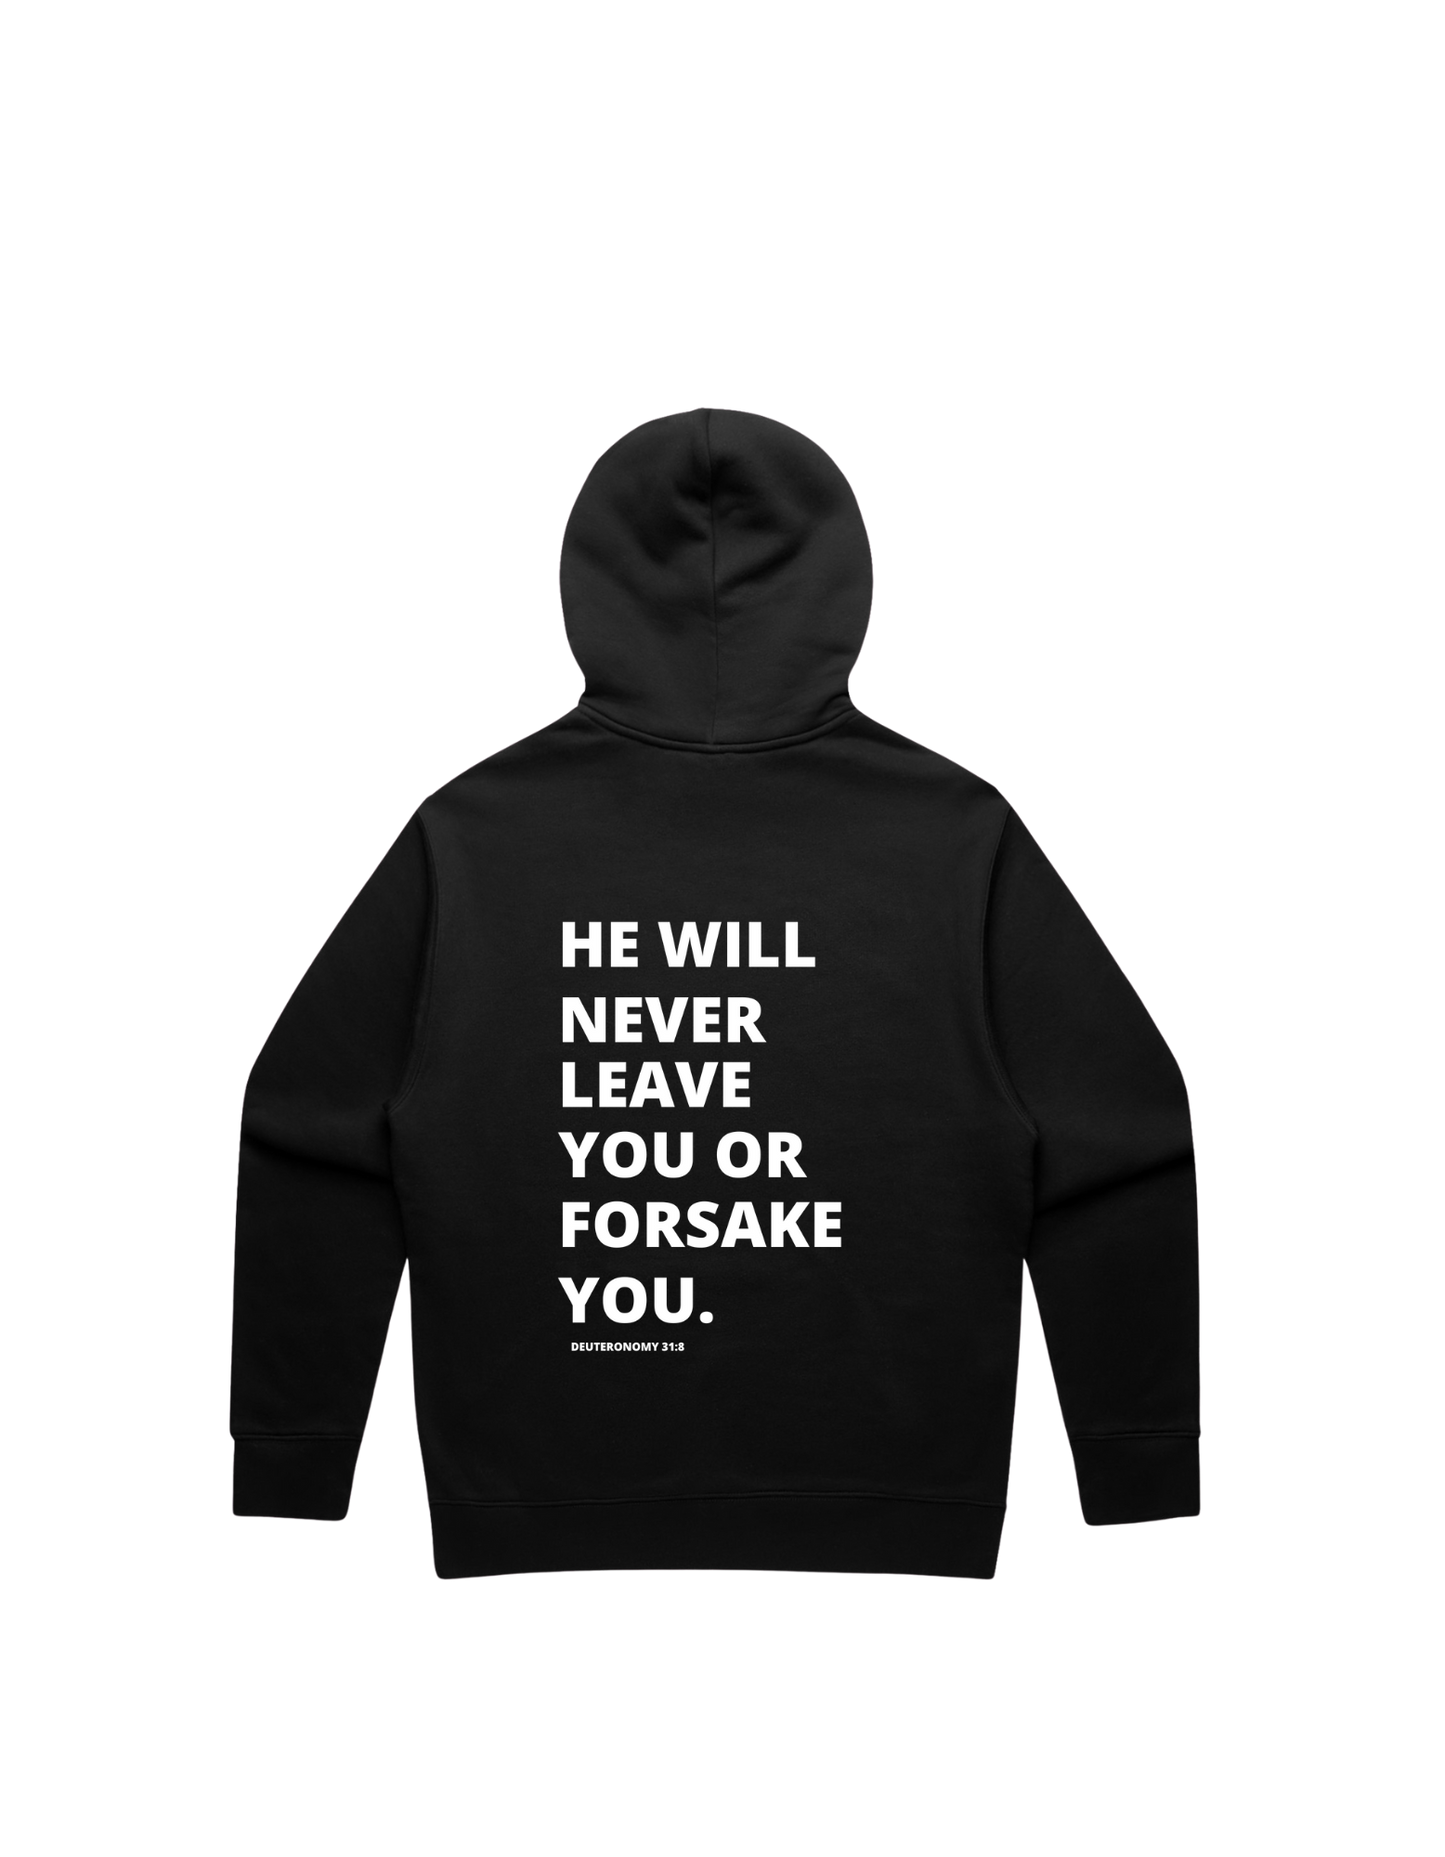 HE will never leave you or forsake you - Unisex Relax Half Zip -